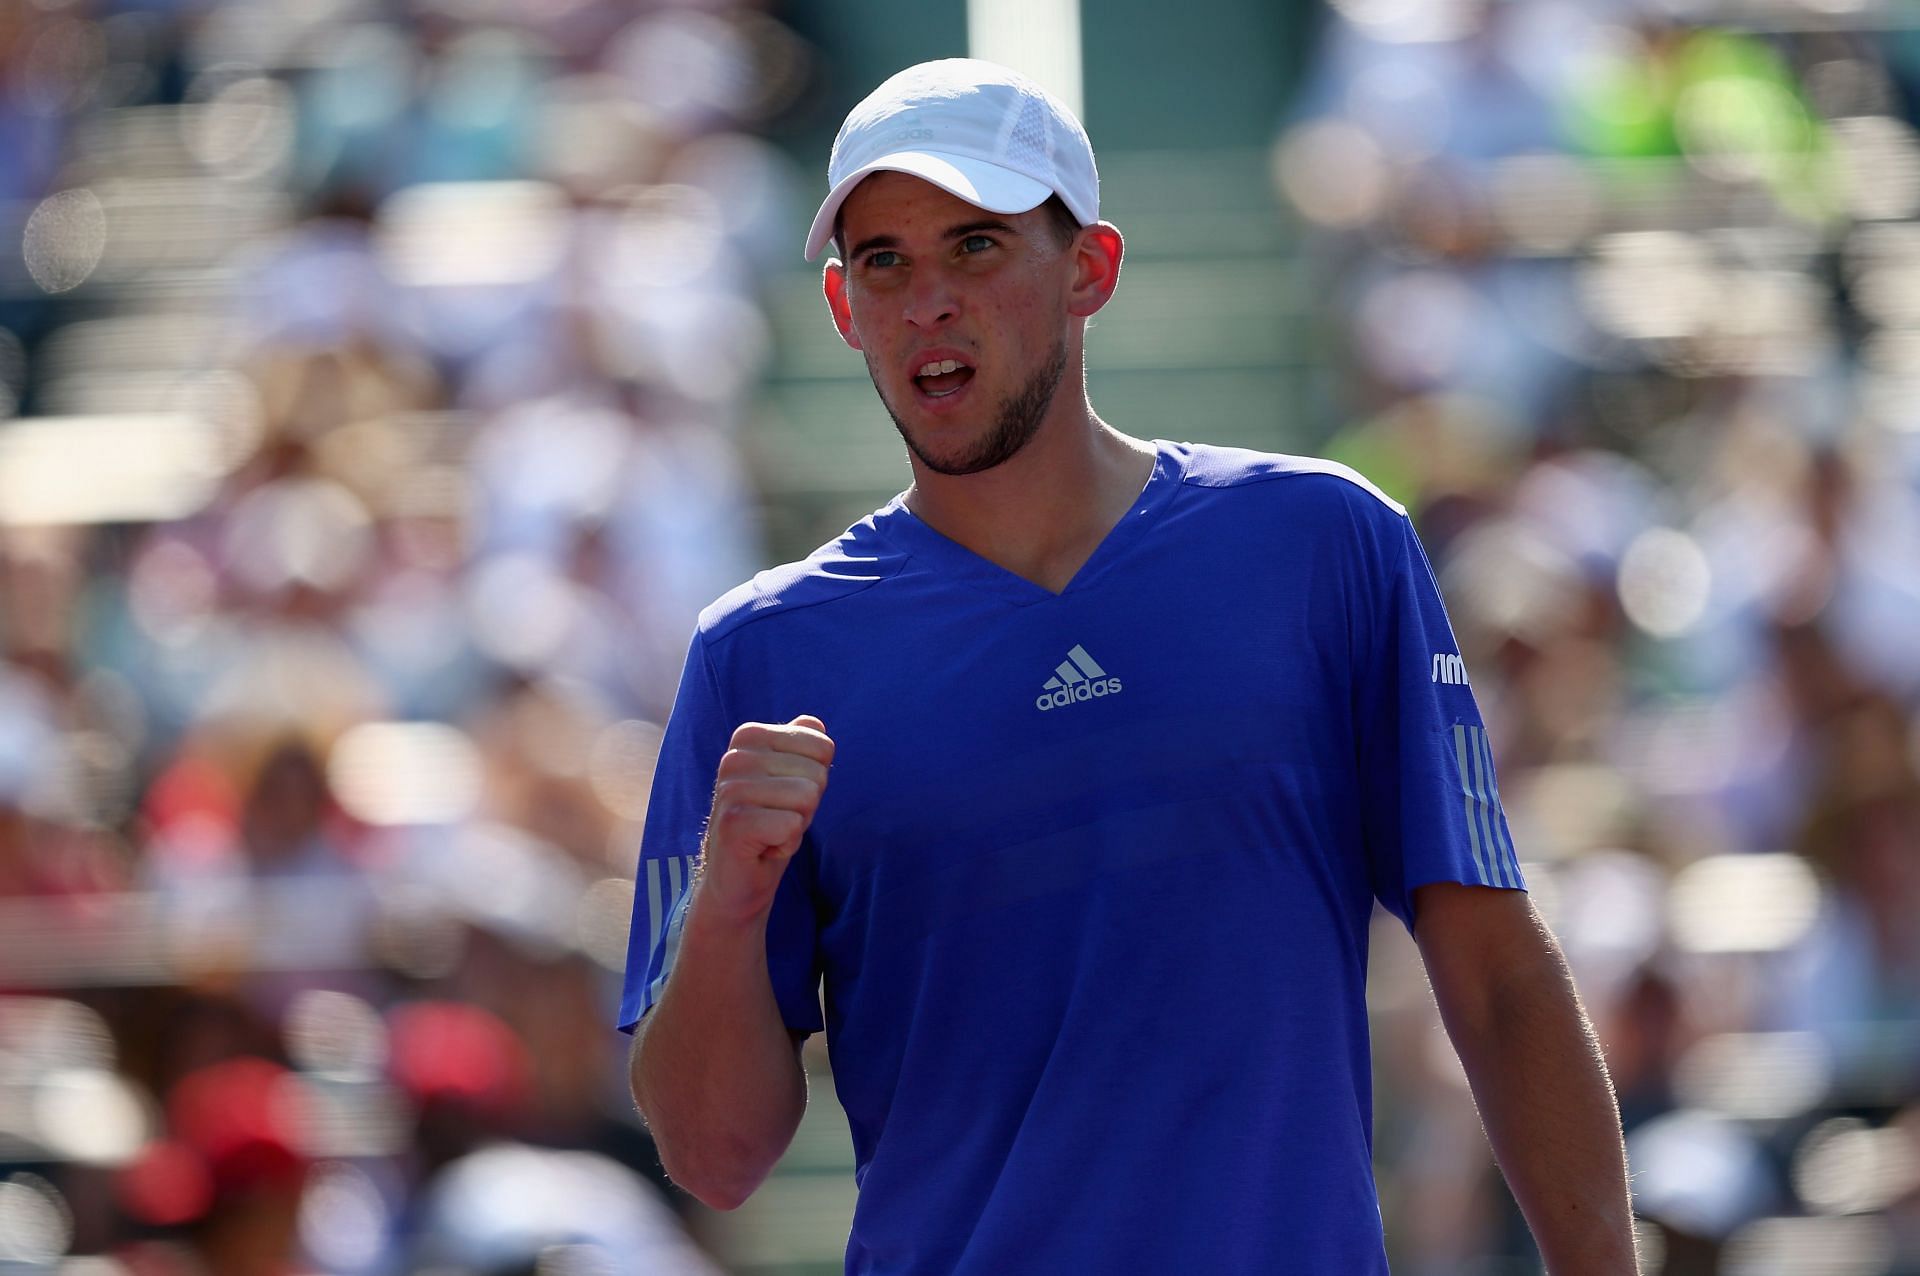 Dominic Thiem celebrating a point during a match at the 2015 Miami Open